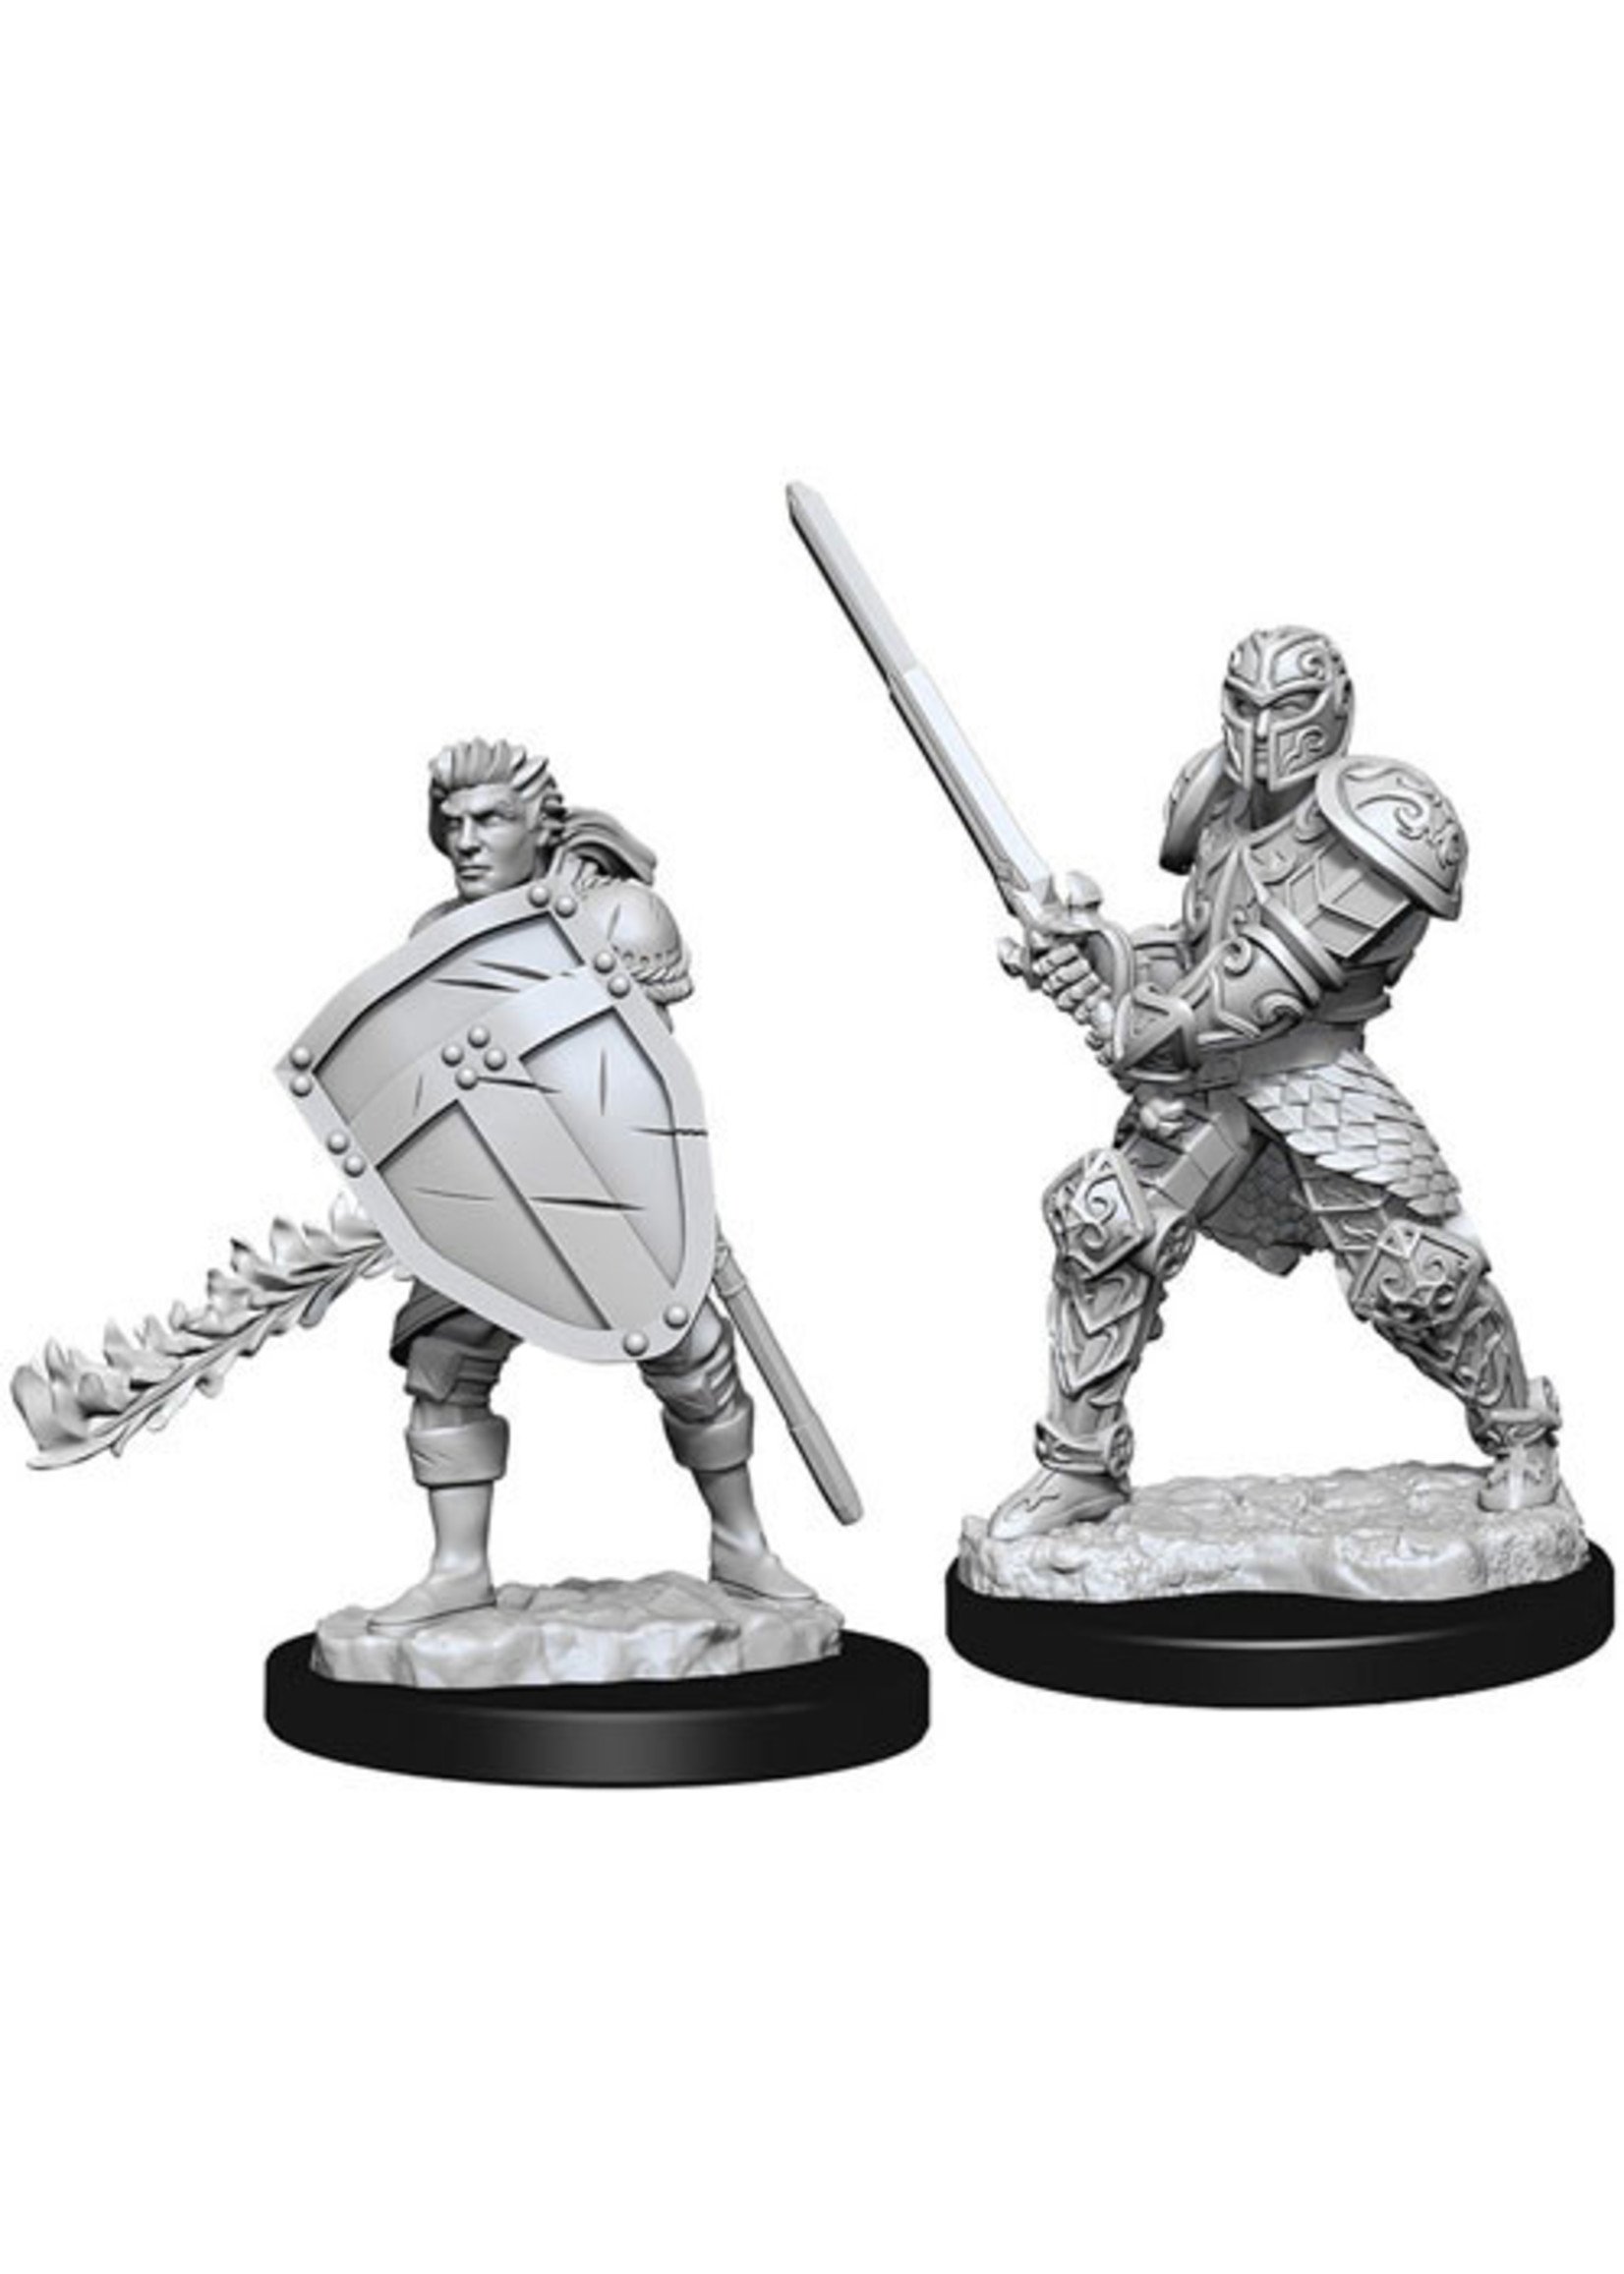 Dungeons & Dragons: Nolzur's Marvelous Unpainted Miniatures - W08 Male Human Fighter